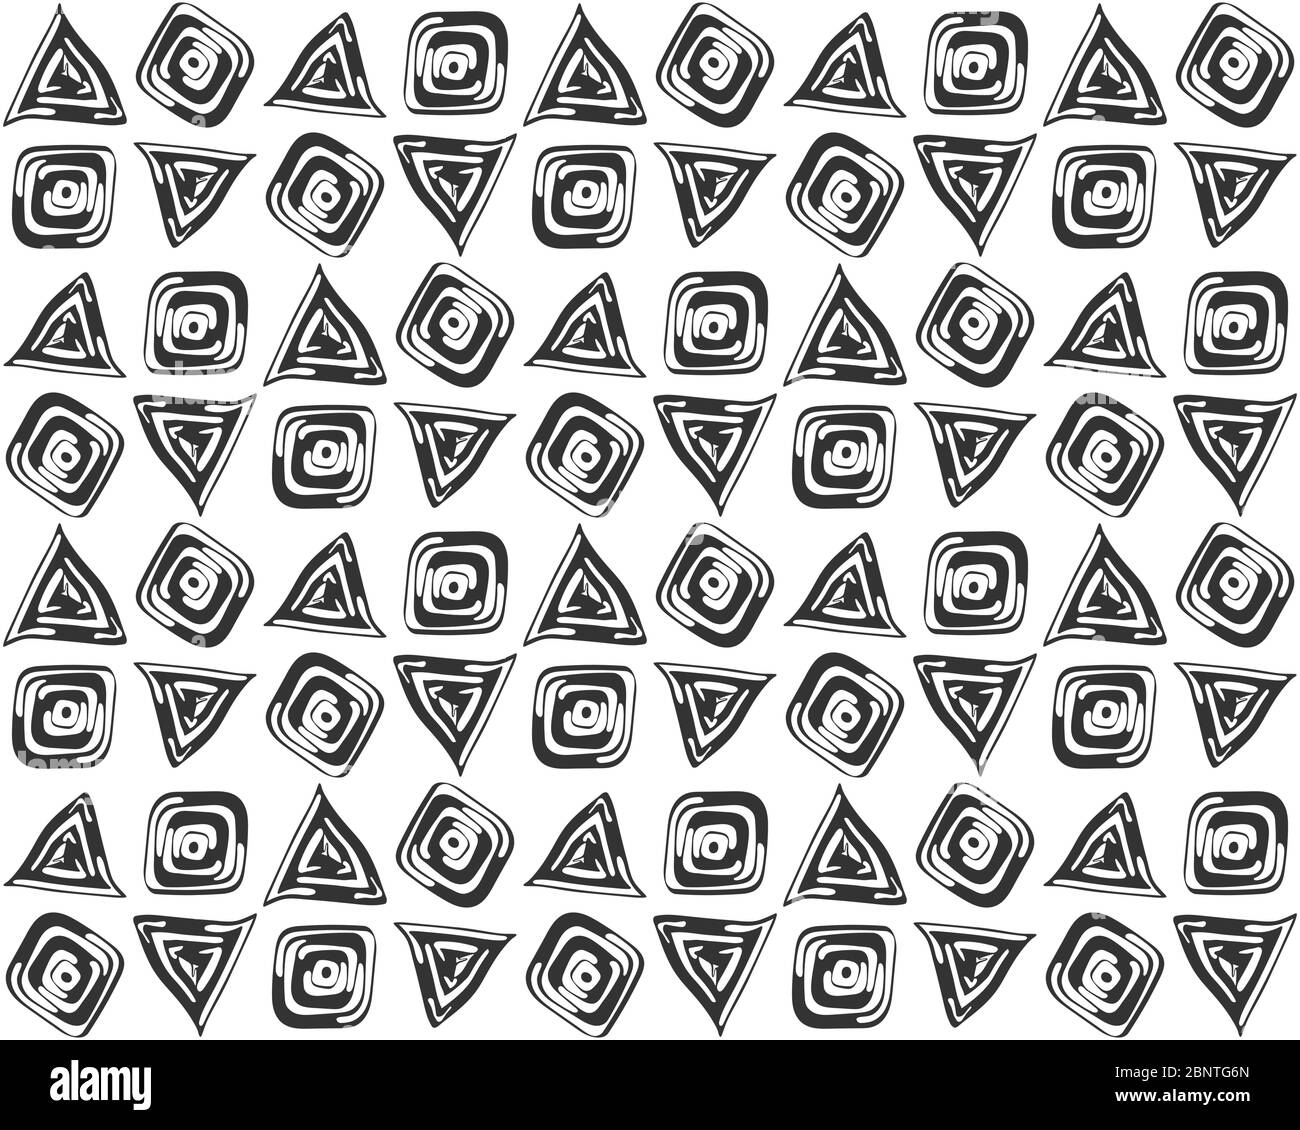 Vector seamless pattern of arbitrary shapes for background, banner, screen saver, and design. Vector illustration for texture, textiles or packaging, Stock Vector